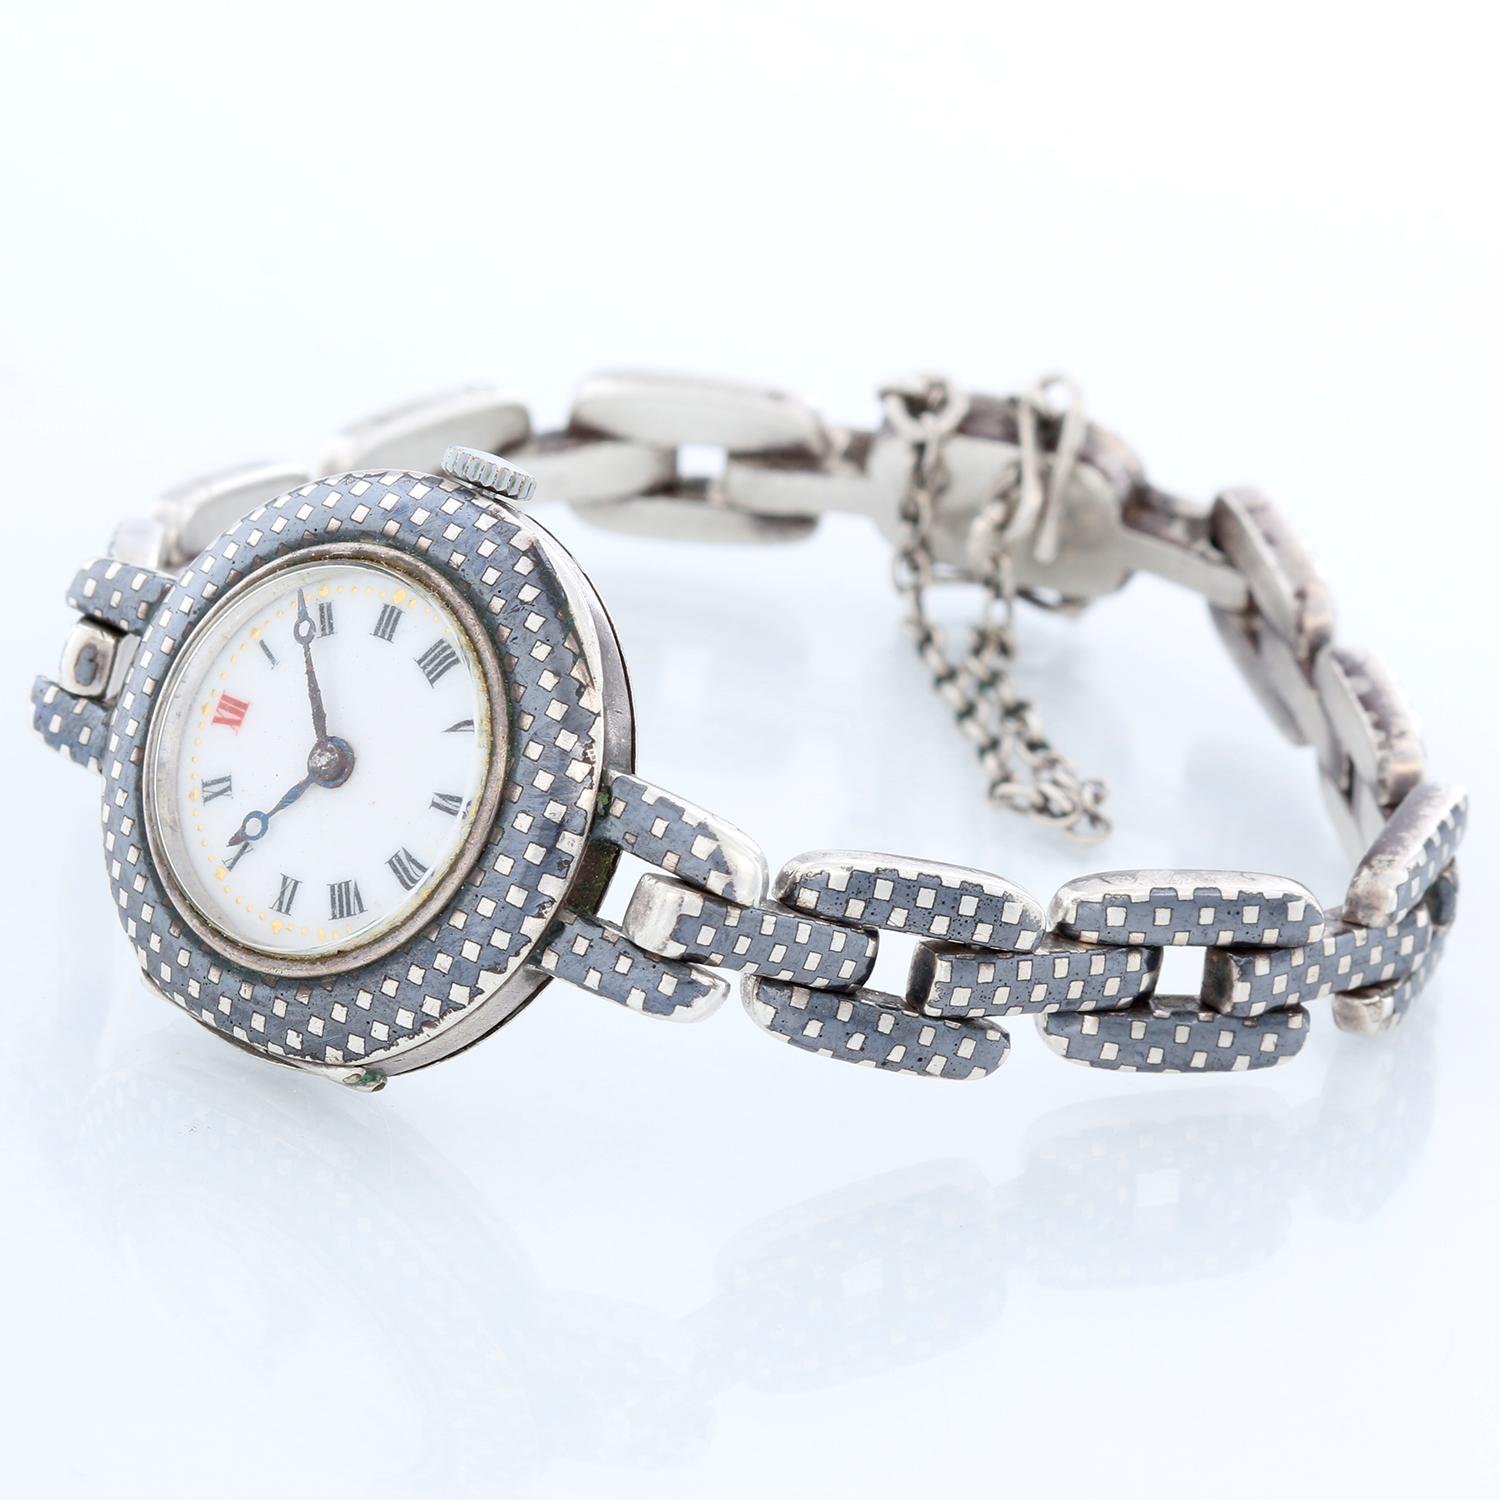 Niello Ladies Manual Winding Wrist Watch - Manual. Steel case with checkered Niello pattern ( 26 mm) . White dial with Roman numerals. Niello checkered link bracelet; fits a 7 1/4 inch wrist. Pre-owned with custom box. 

Please allow 10 days for a